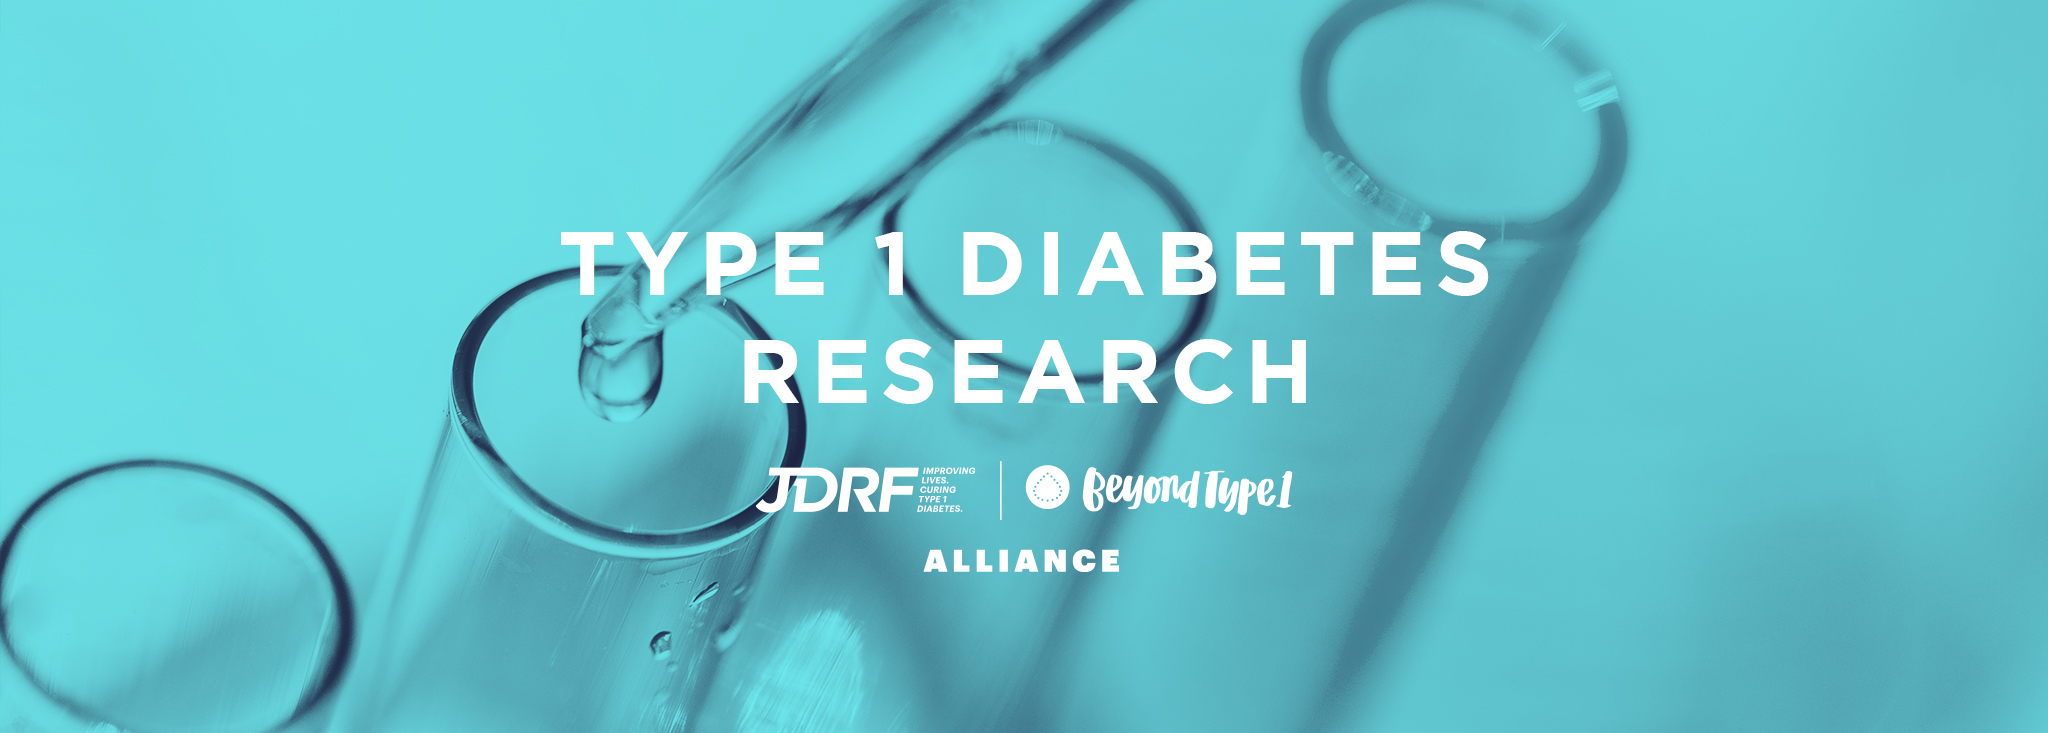 research being done on type 1 diabetes